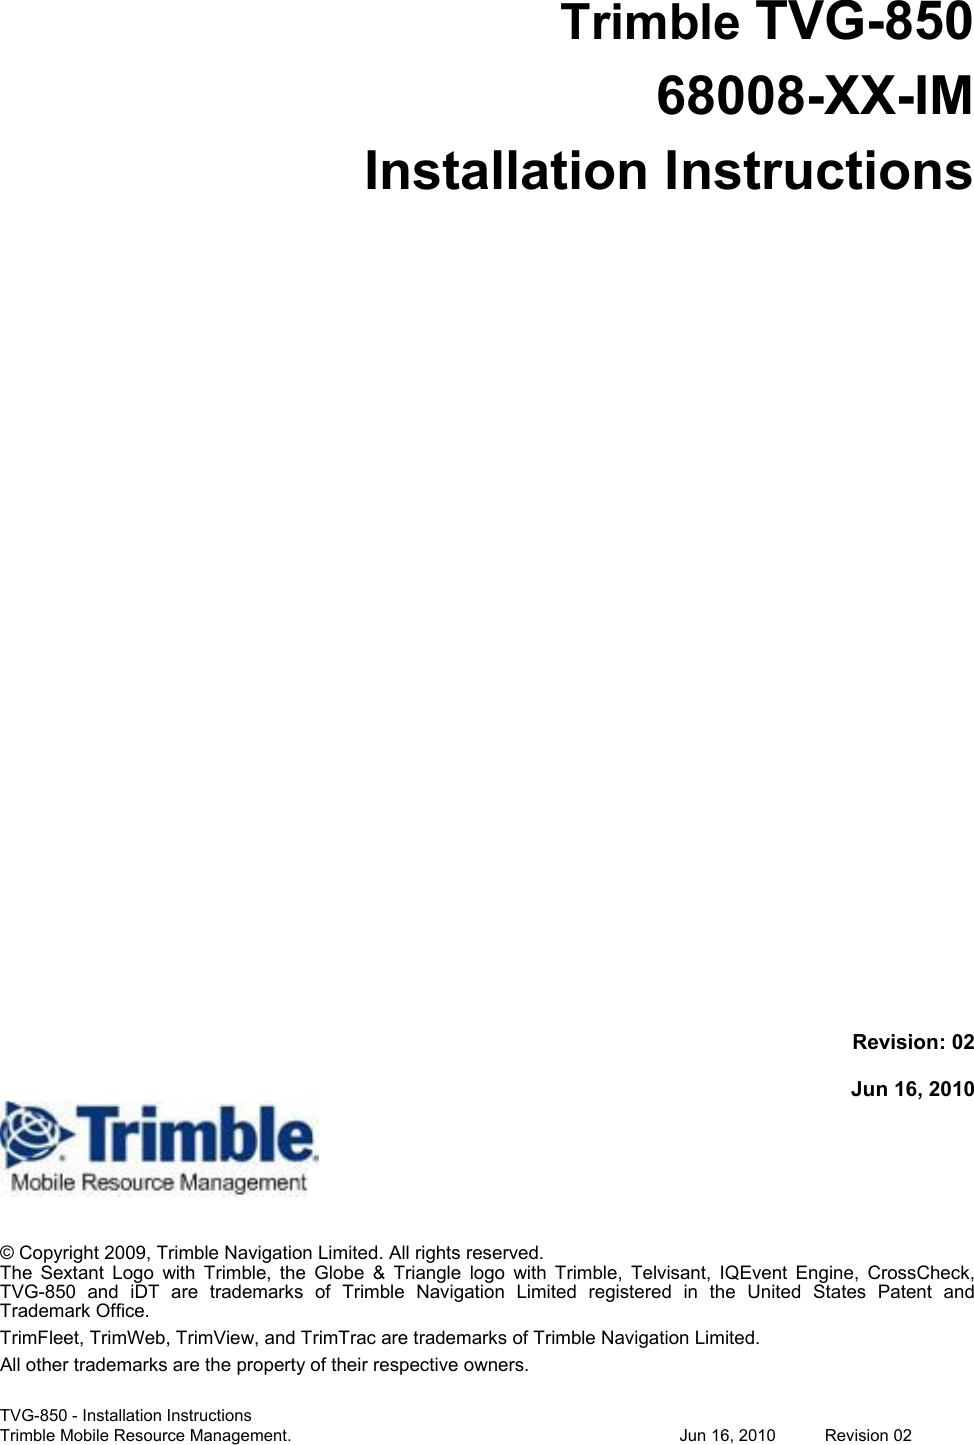 TVG-850 - Installation Instructions Trimble Mobile Resource Management.             Jun 16, 2010  Revision 02   Trimble TVG-850 68008-XX-IM Installation Instructions                         Revision: 02  Jun 16, 2010    © Copyright 2009, Trimble Navigation Limited. All rights reserved.  The  Sextant  Logo  with  Trimble,  the  Globe  &amp;  Triangle  logo  with  Trimble,  Telvisant,  IQEvent  Engine,  CrossCheck, TVG-850  and  iDT  are  trademarks  of  Trimble  Navigation  Limited  registered  in  the  United  States  Patent  and Trademark Office. TrimFleet, TrimWeb, TrimView, and TrimTrac are trademarks of Trimble Navigation Limited. All other trademarks are the property of their respective owners. 